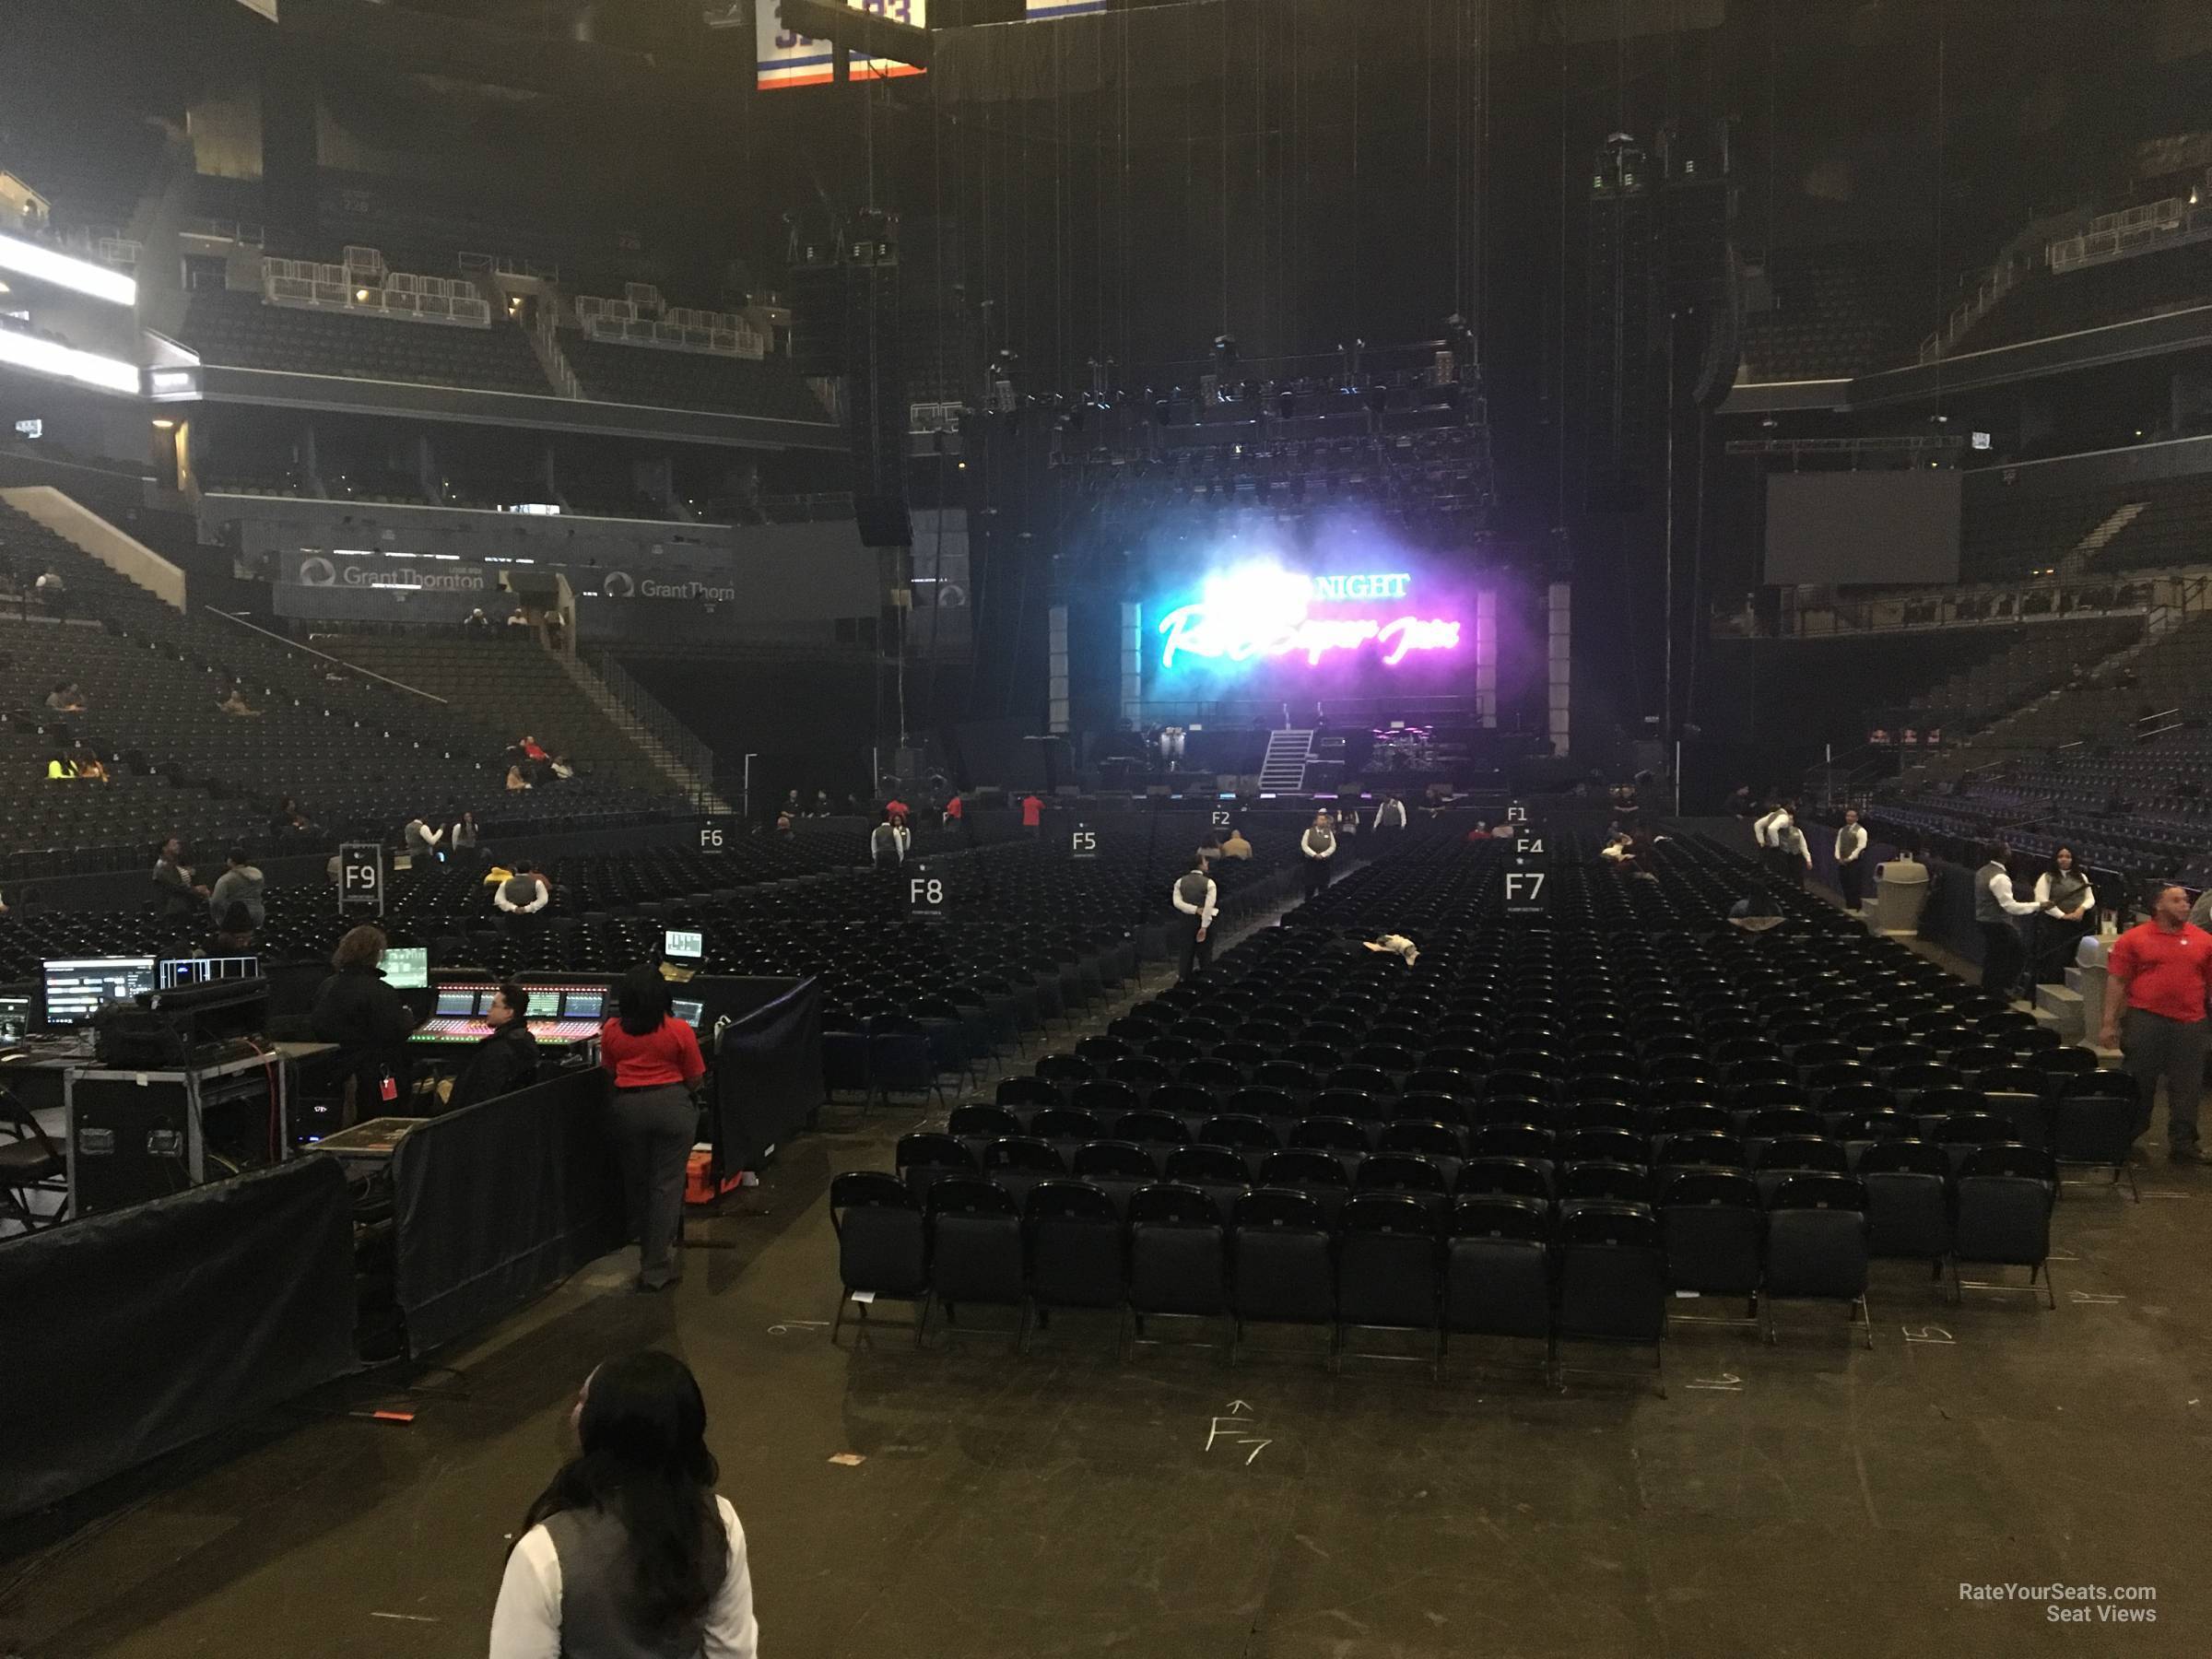 section 13, row 3 seat view  for concert - barclays center